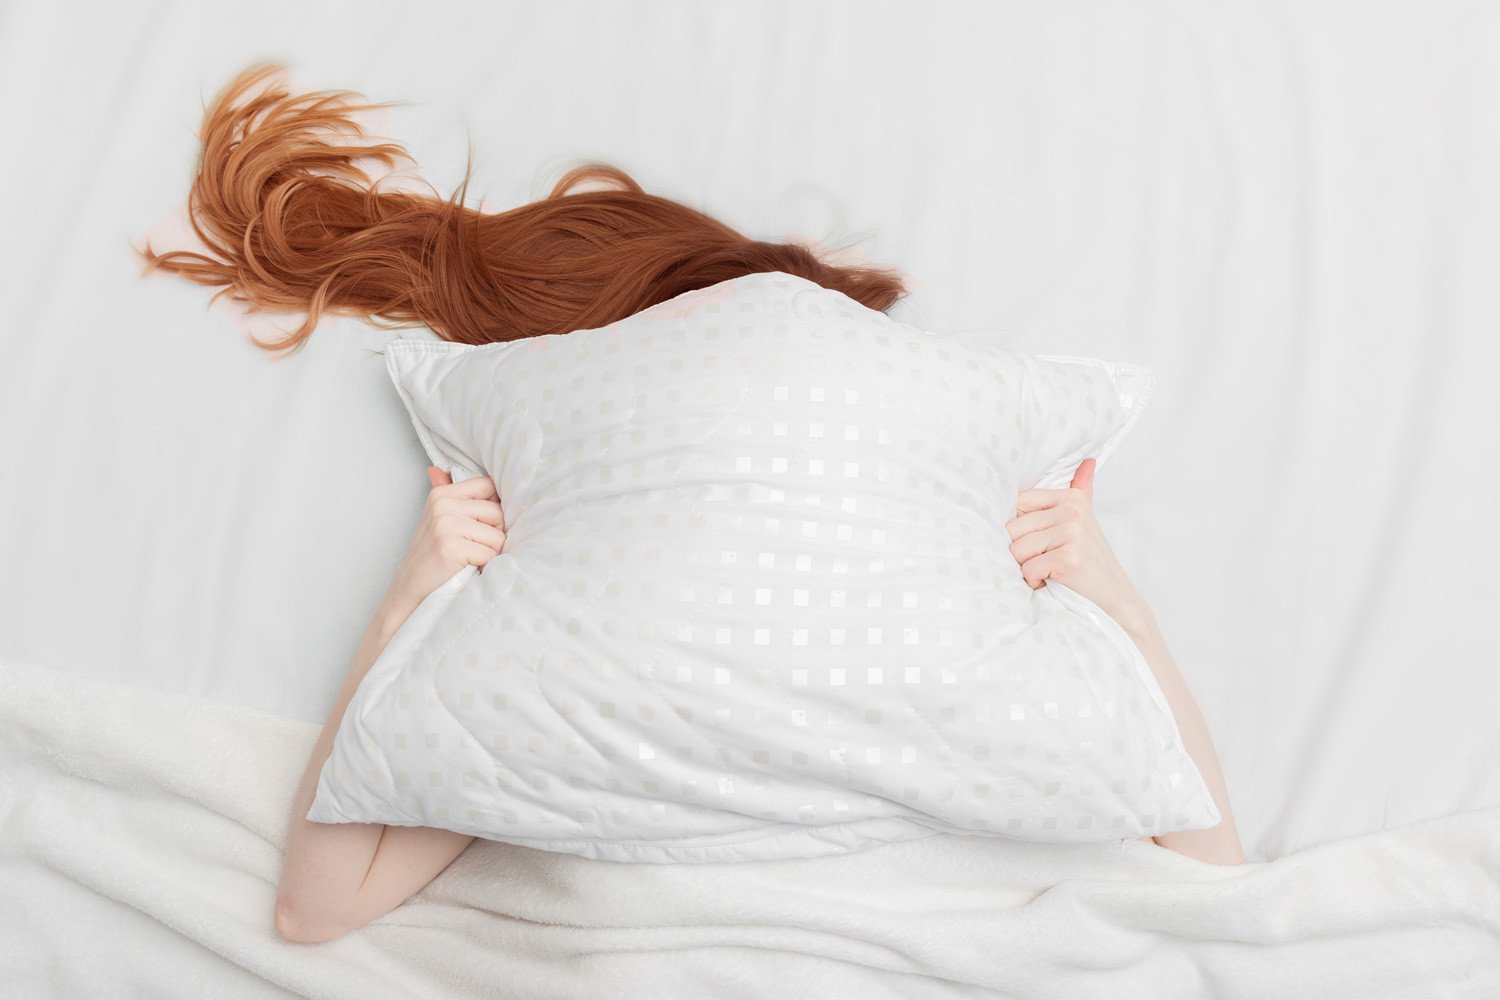 preventing sleep lines and pillow wrinkles